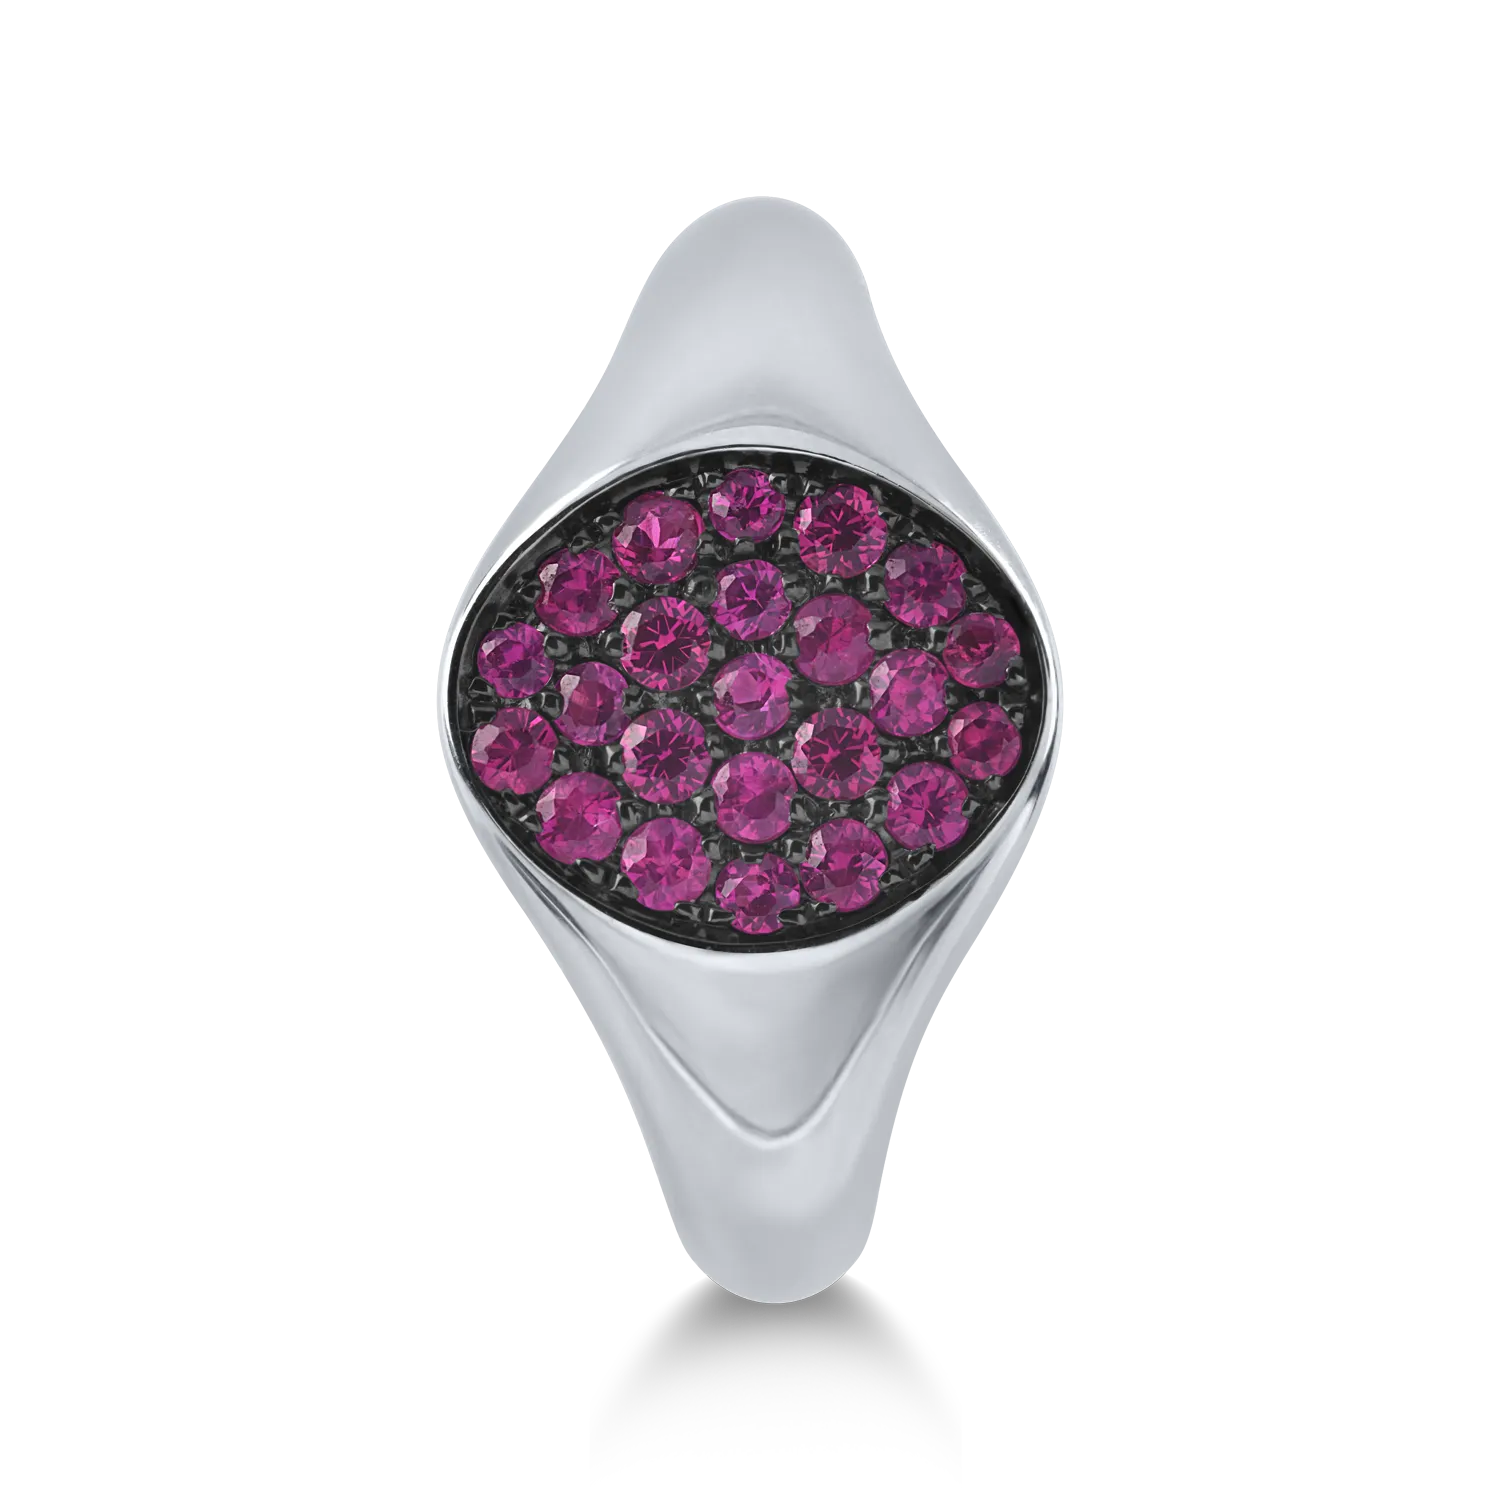 White gold ring with 0.4ct rubies